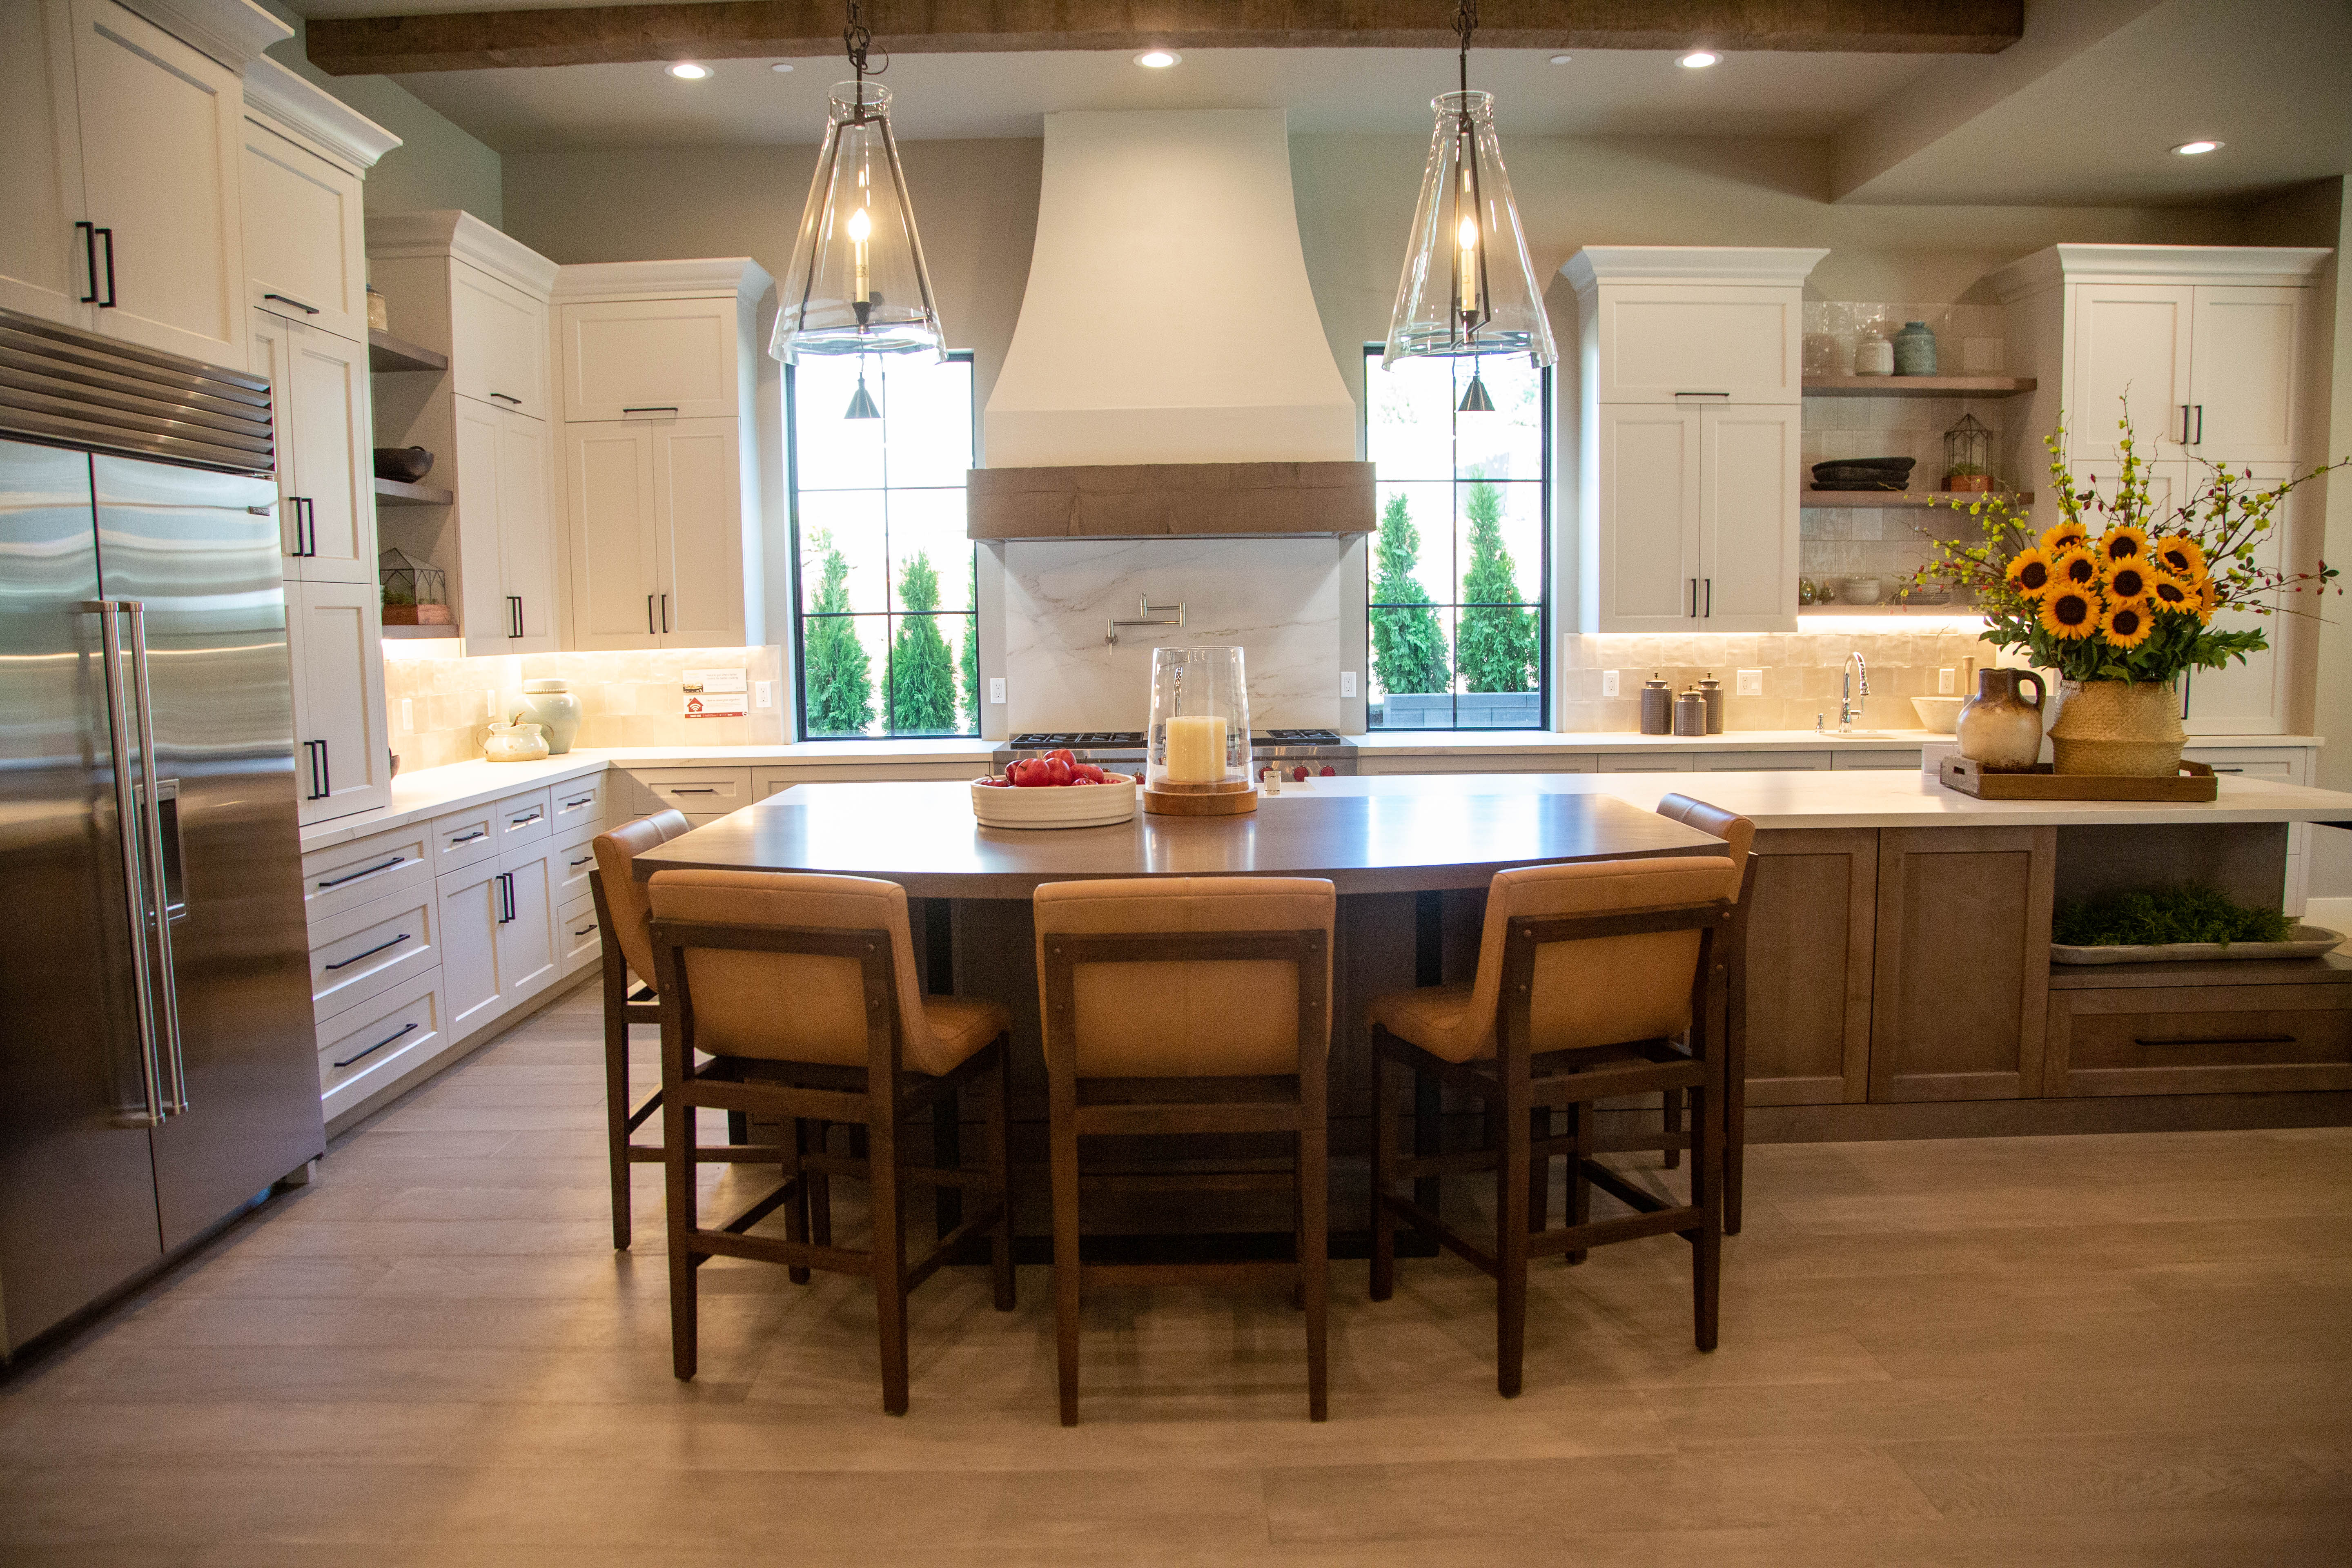 25 kitchen trends Find popular Houzz colors, cabinets ...